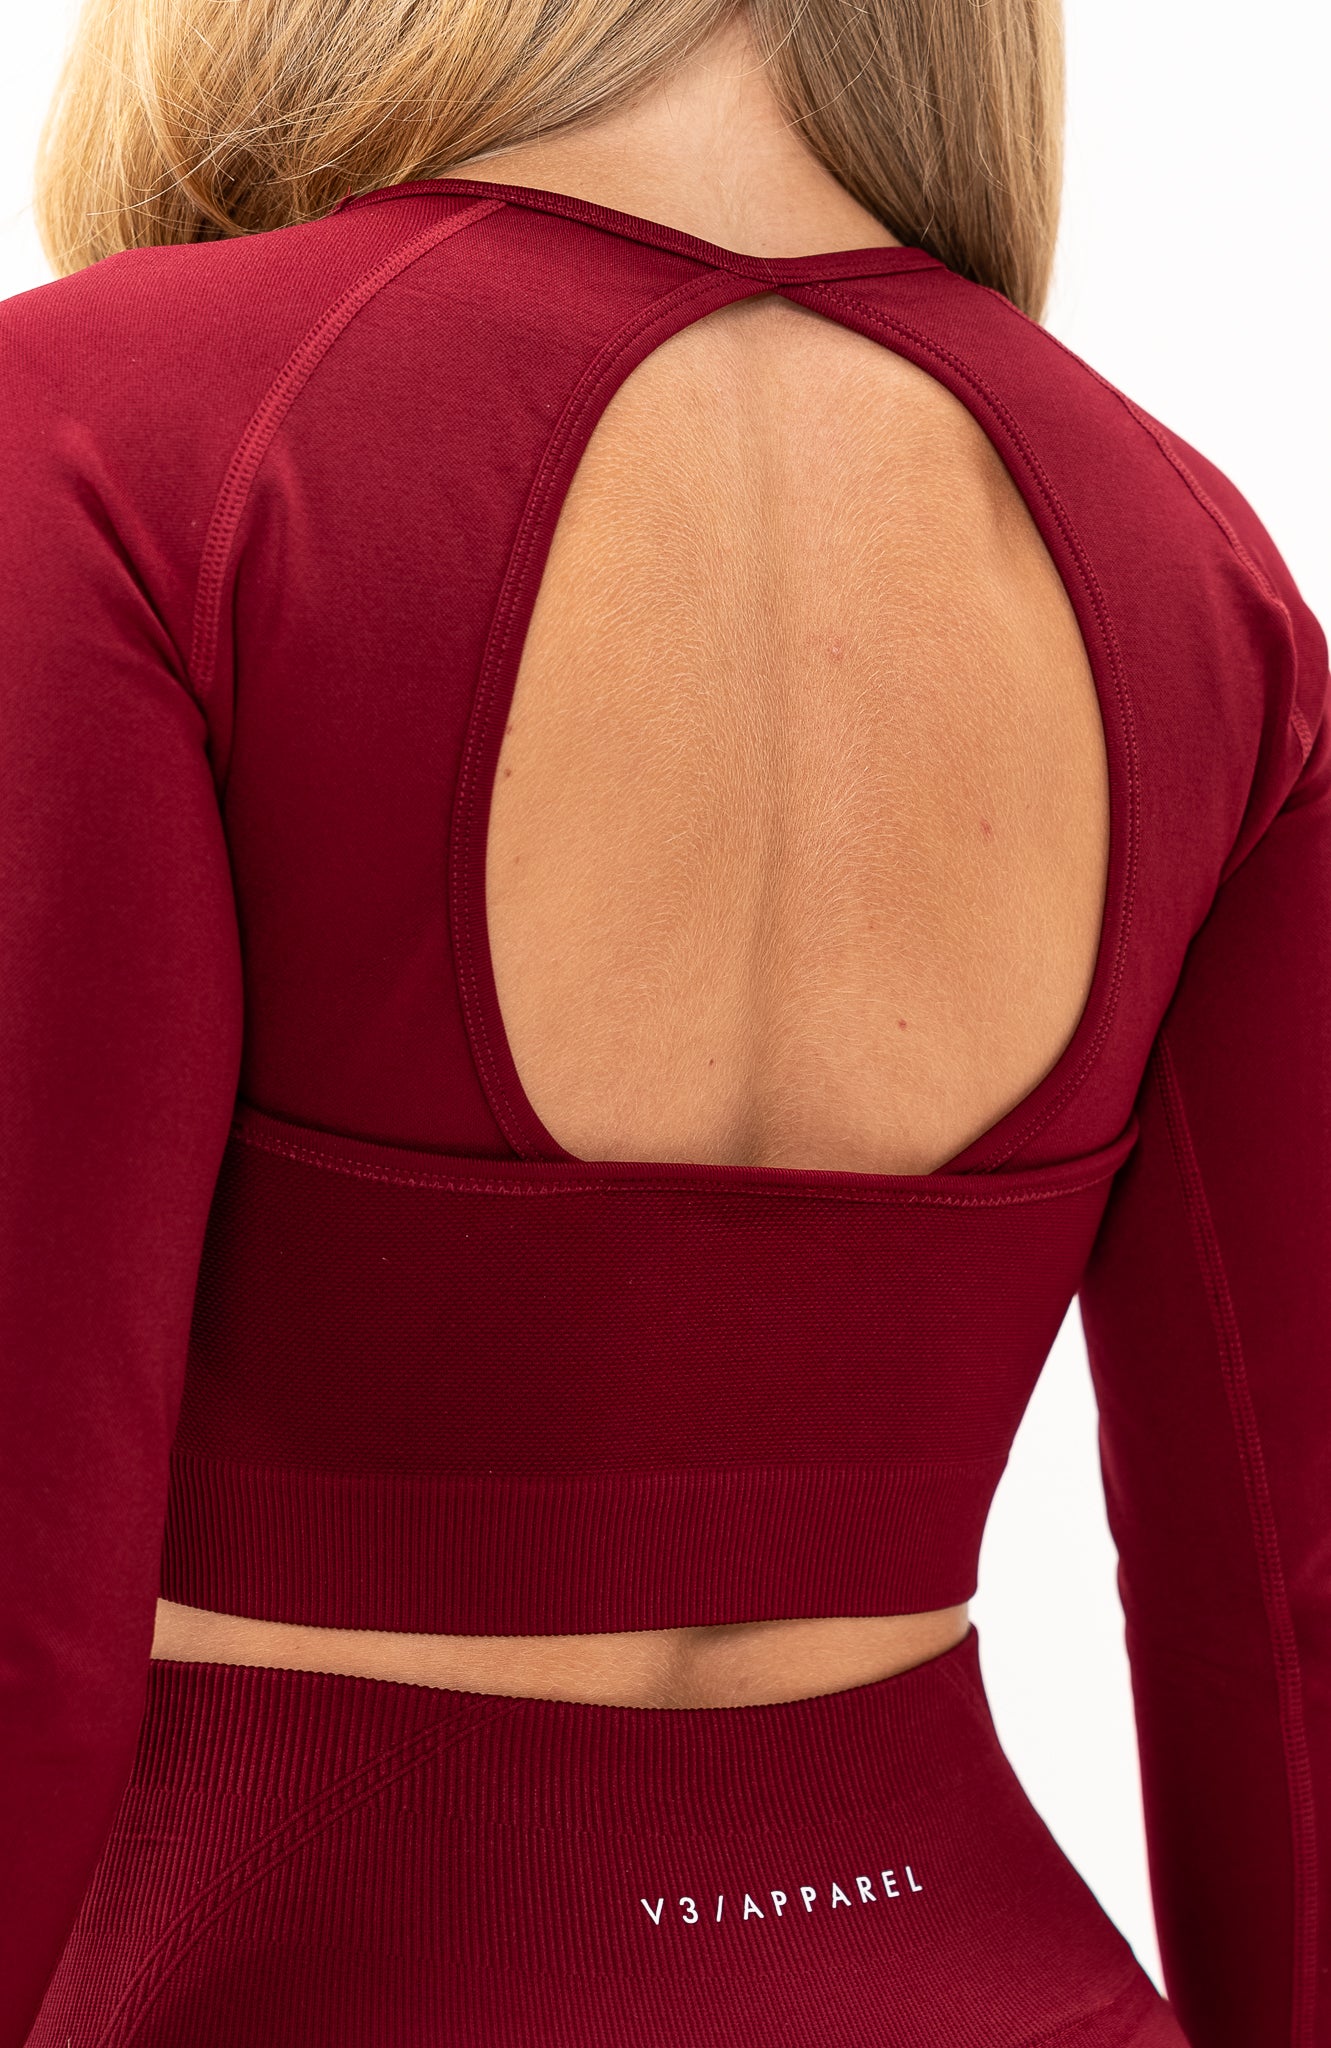 redbaysand Women's Tempo seamless long sleeve cropped training top in burgundy red with thumb hole long sleeves and crop fit for gym workouts training, Running, yoga, bodybuilding and bikini fitness.